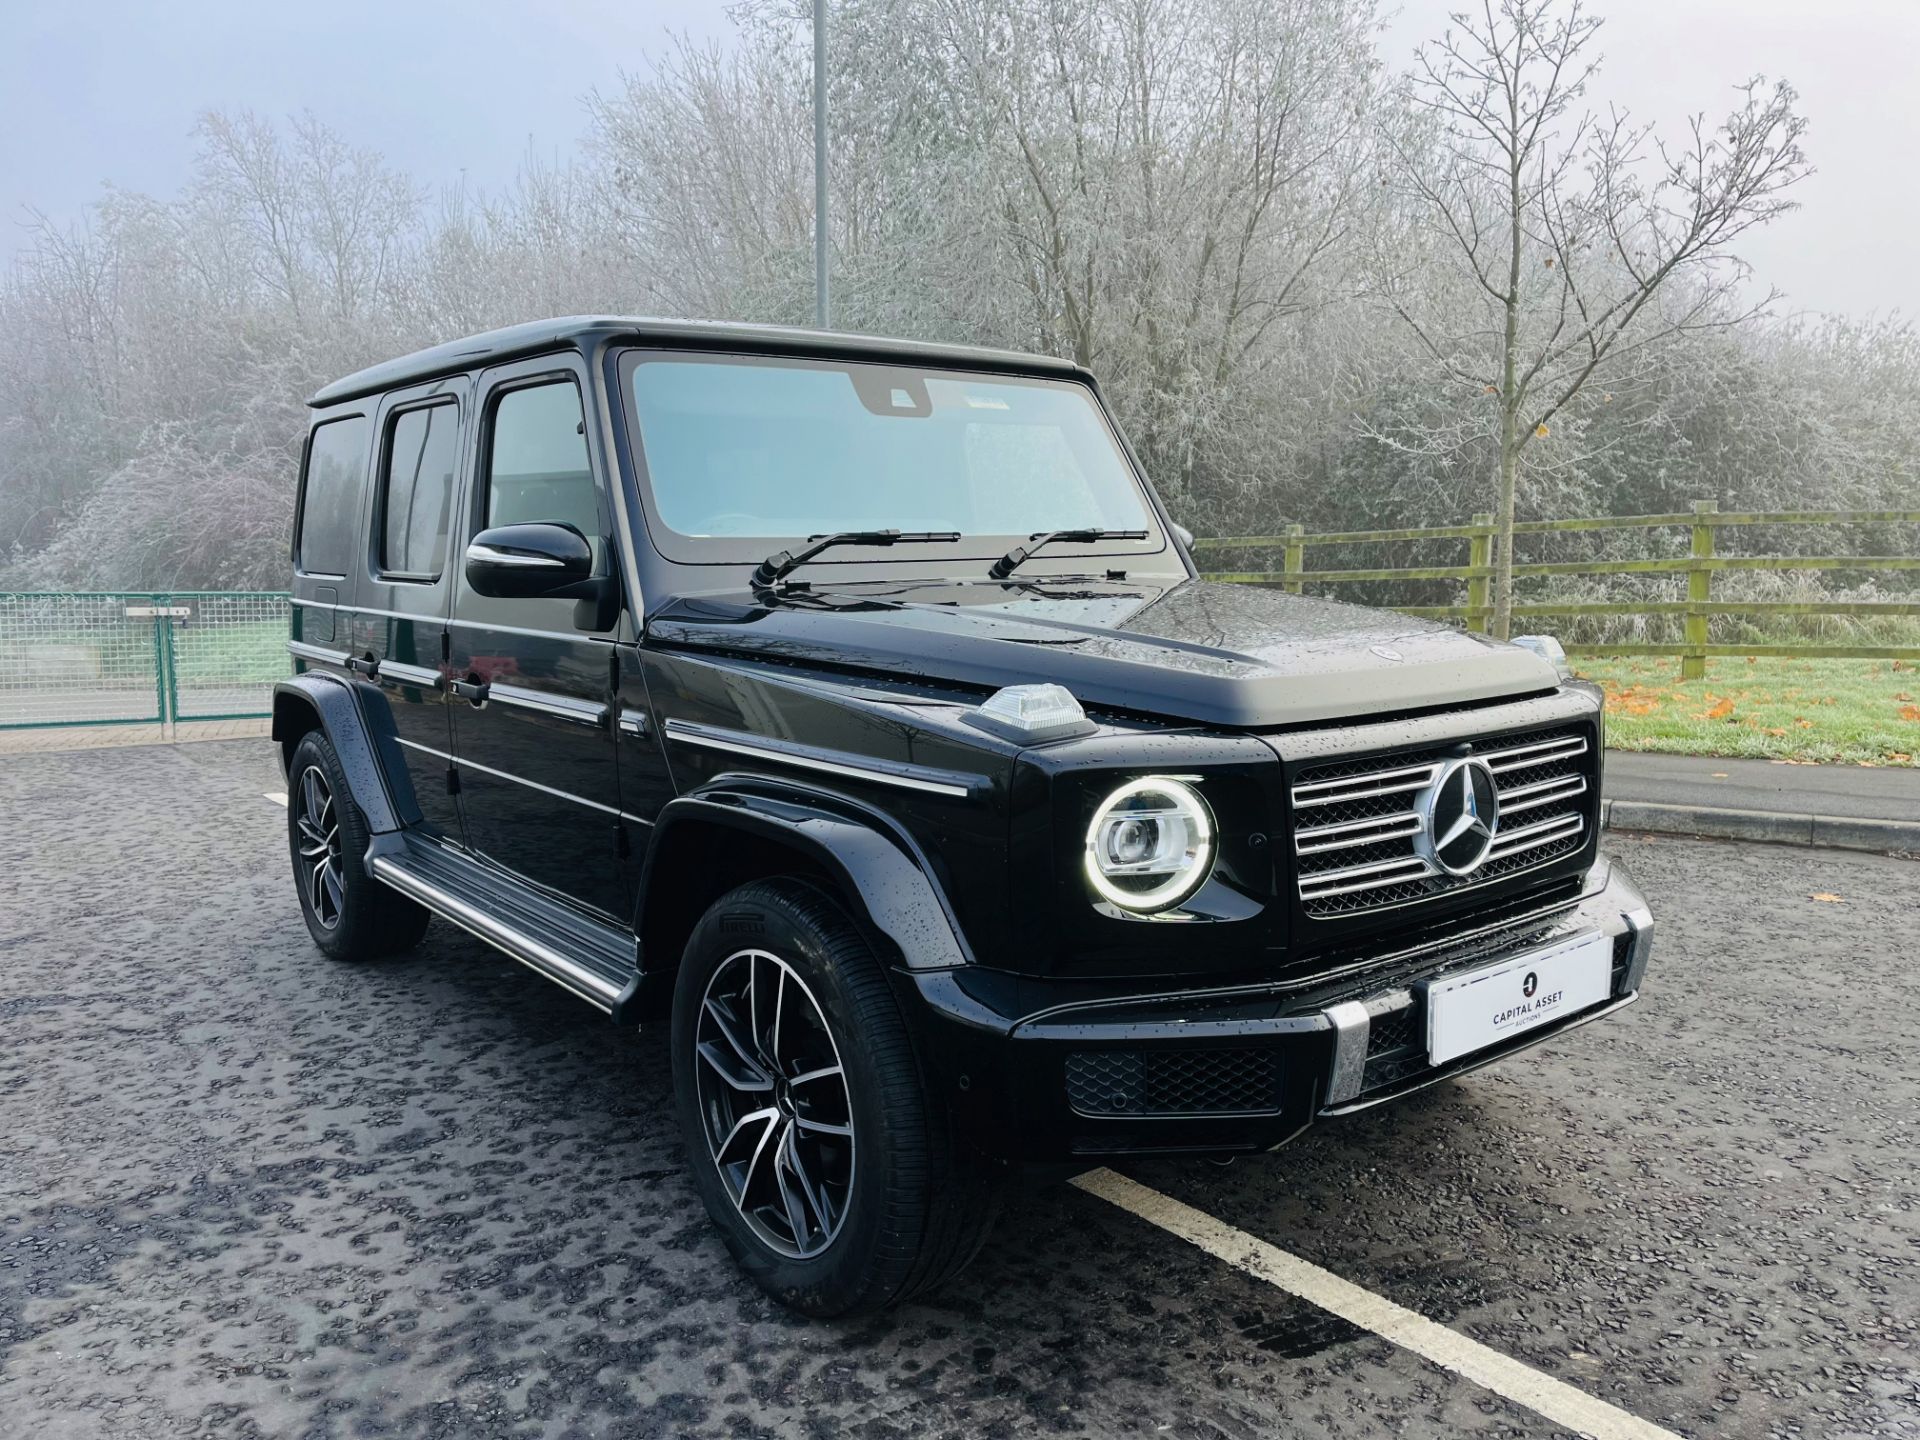 MERCEDES G400d AMG-LINE PREMIUM PLUS (72 REG) 1 OWNER WITH ONLY 9500 MILES - GREAT SPEC - Image 3 of 45